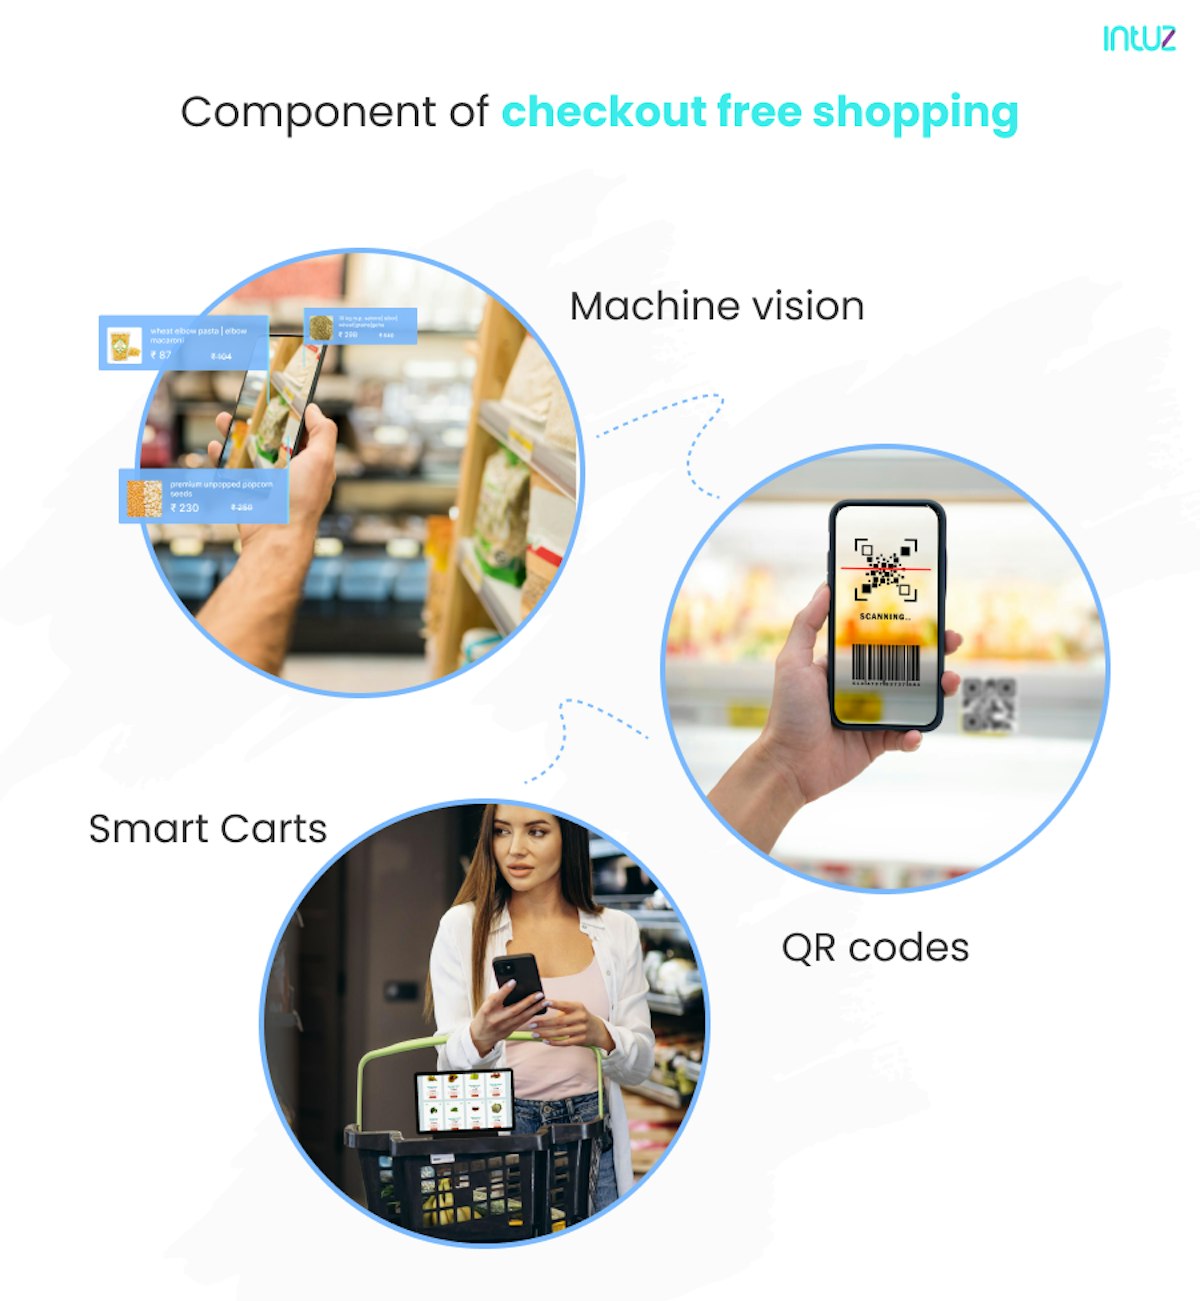 Componenets of Checkout free shopping